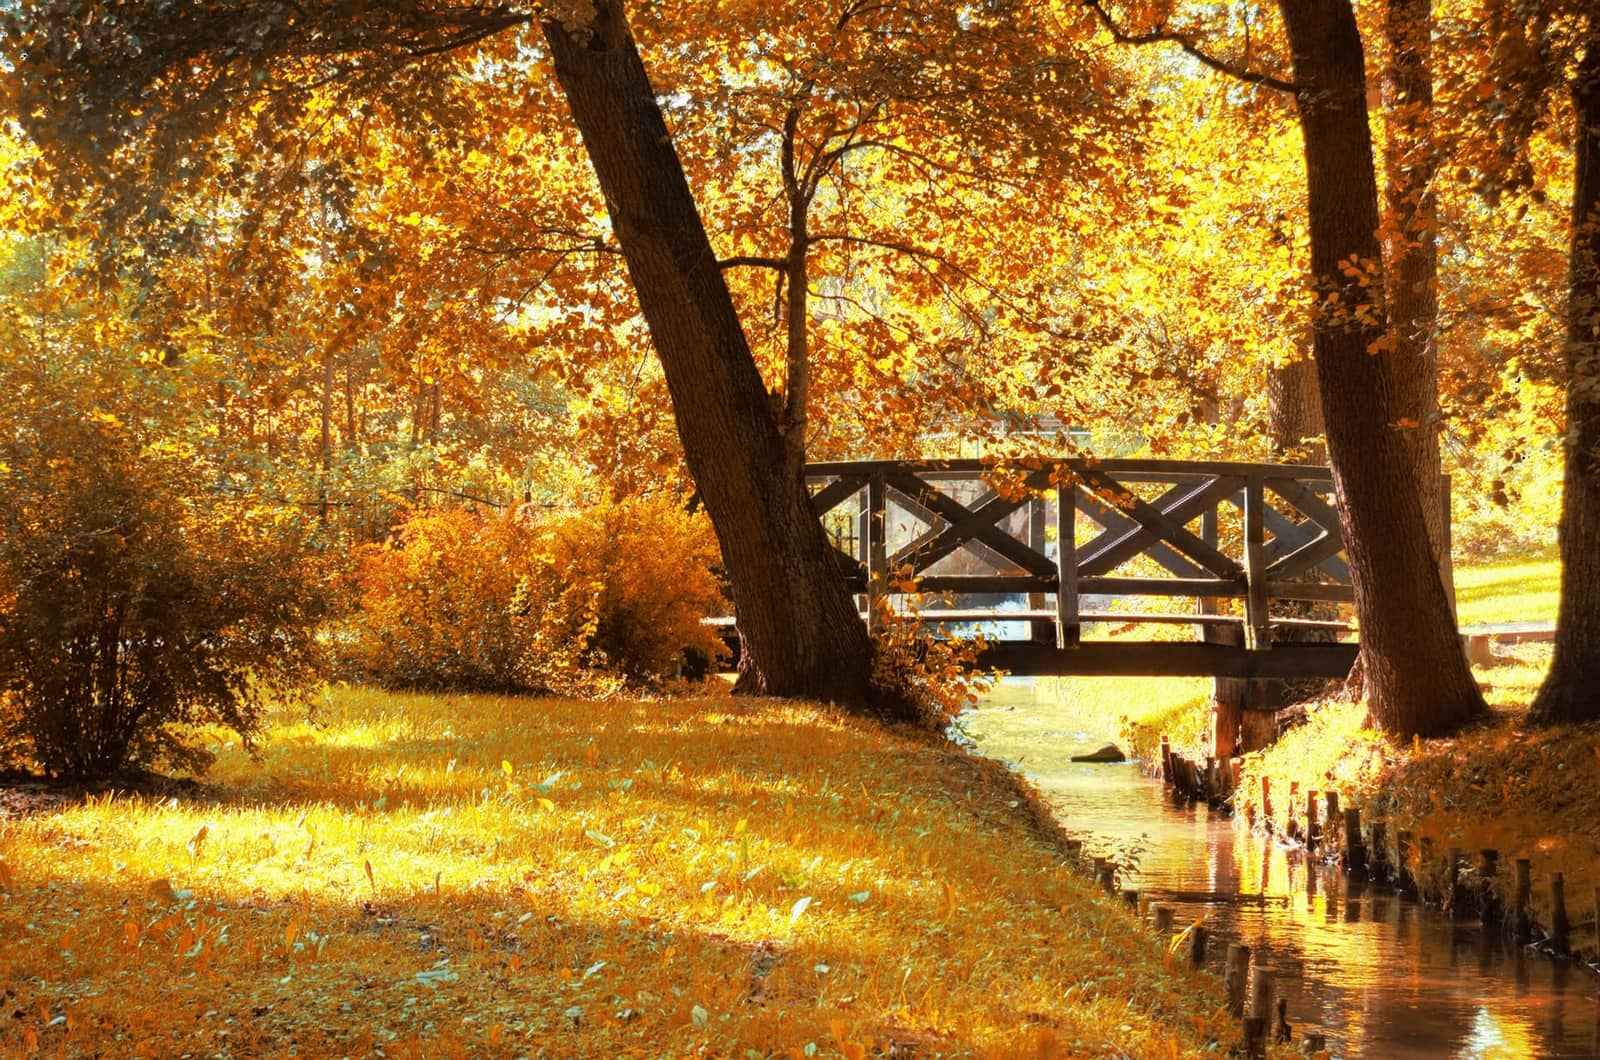 small walking bridge over a canal in the fall